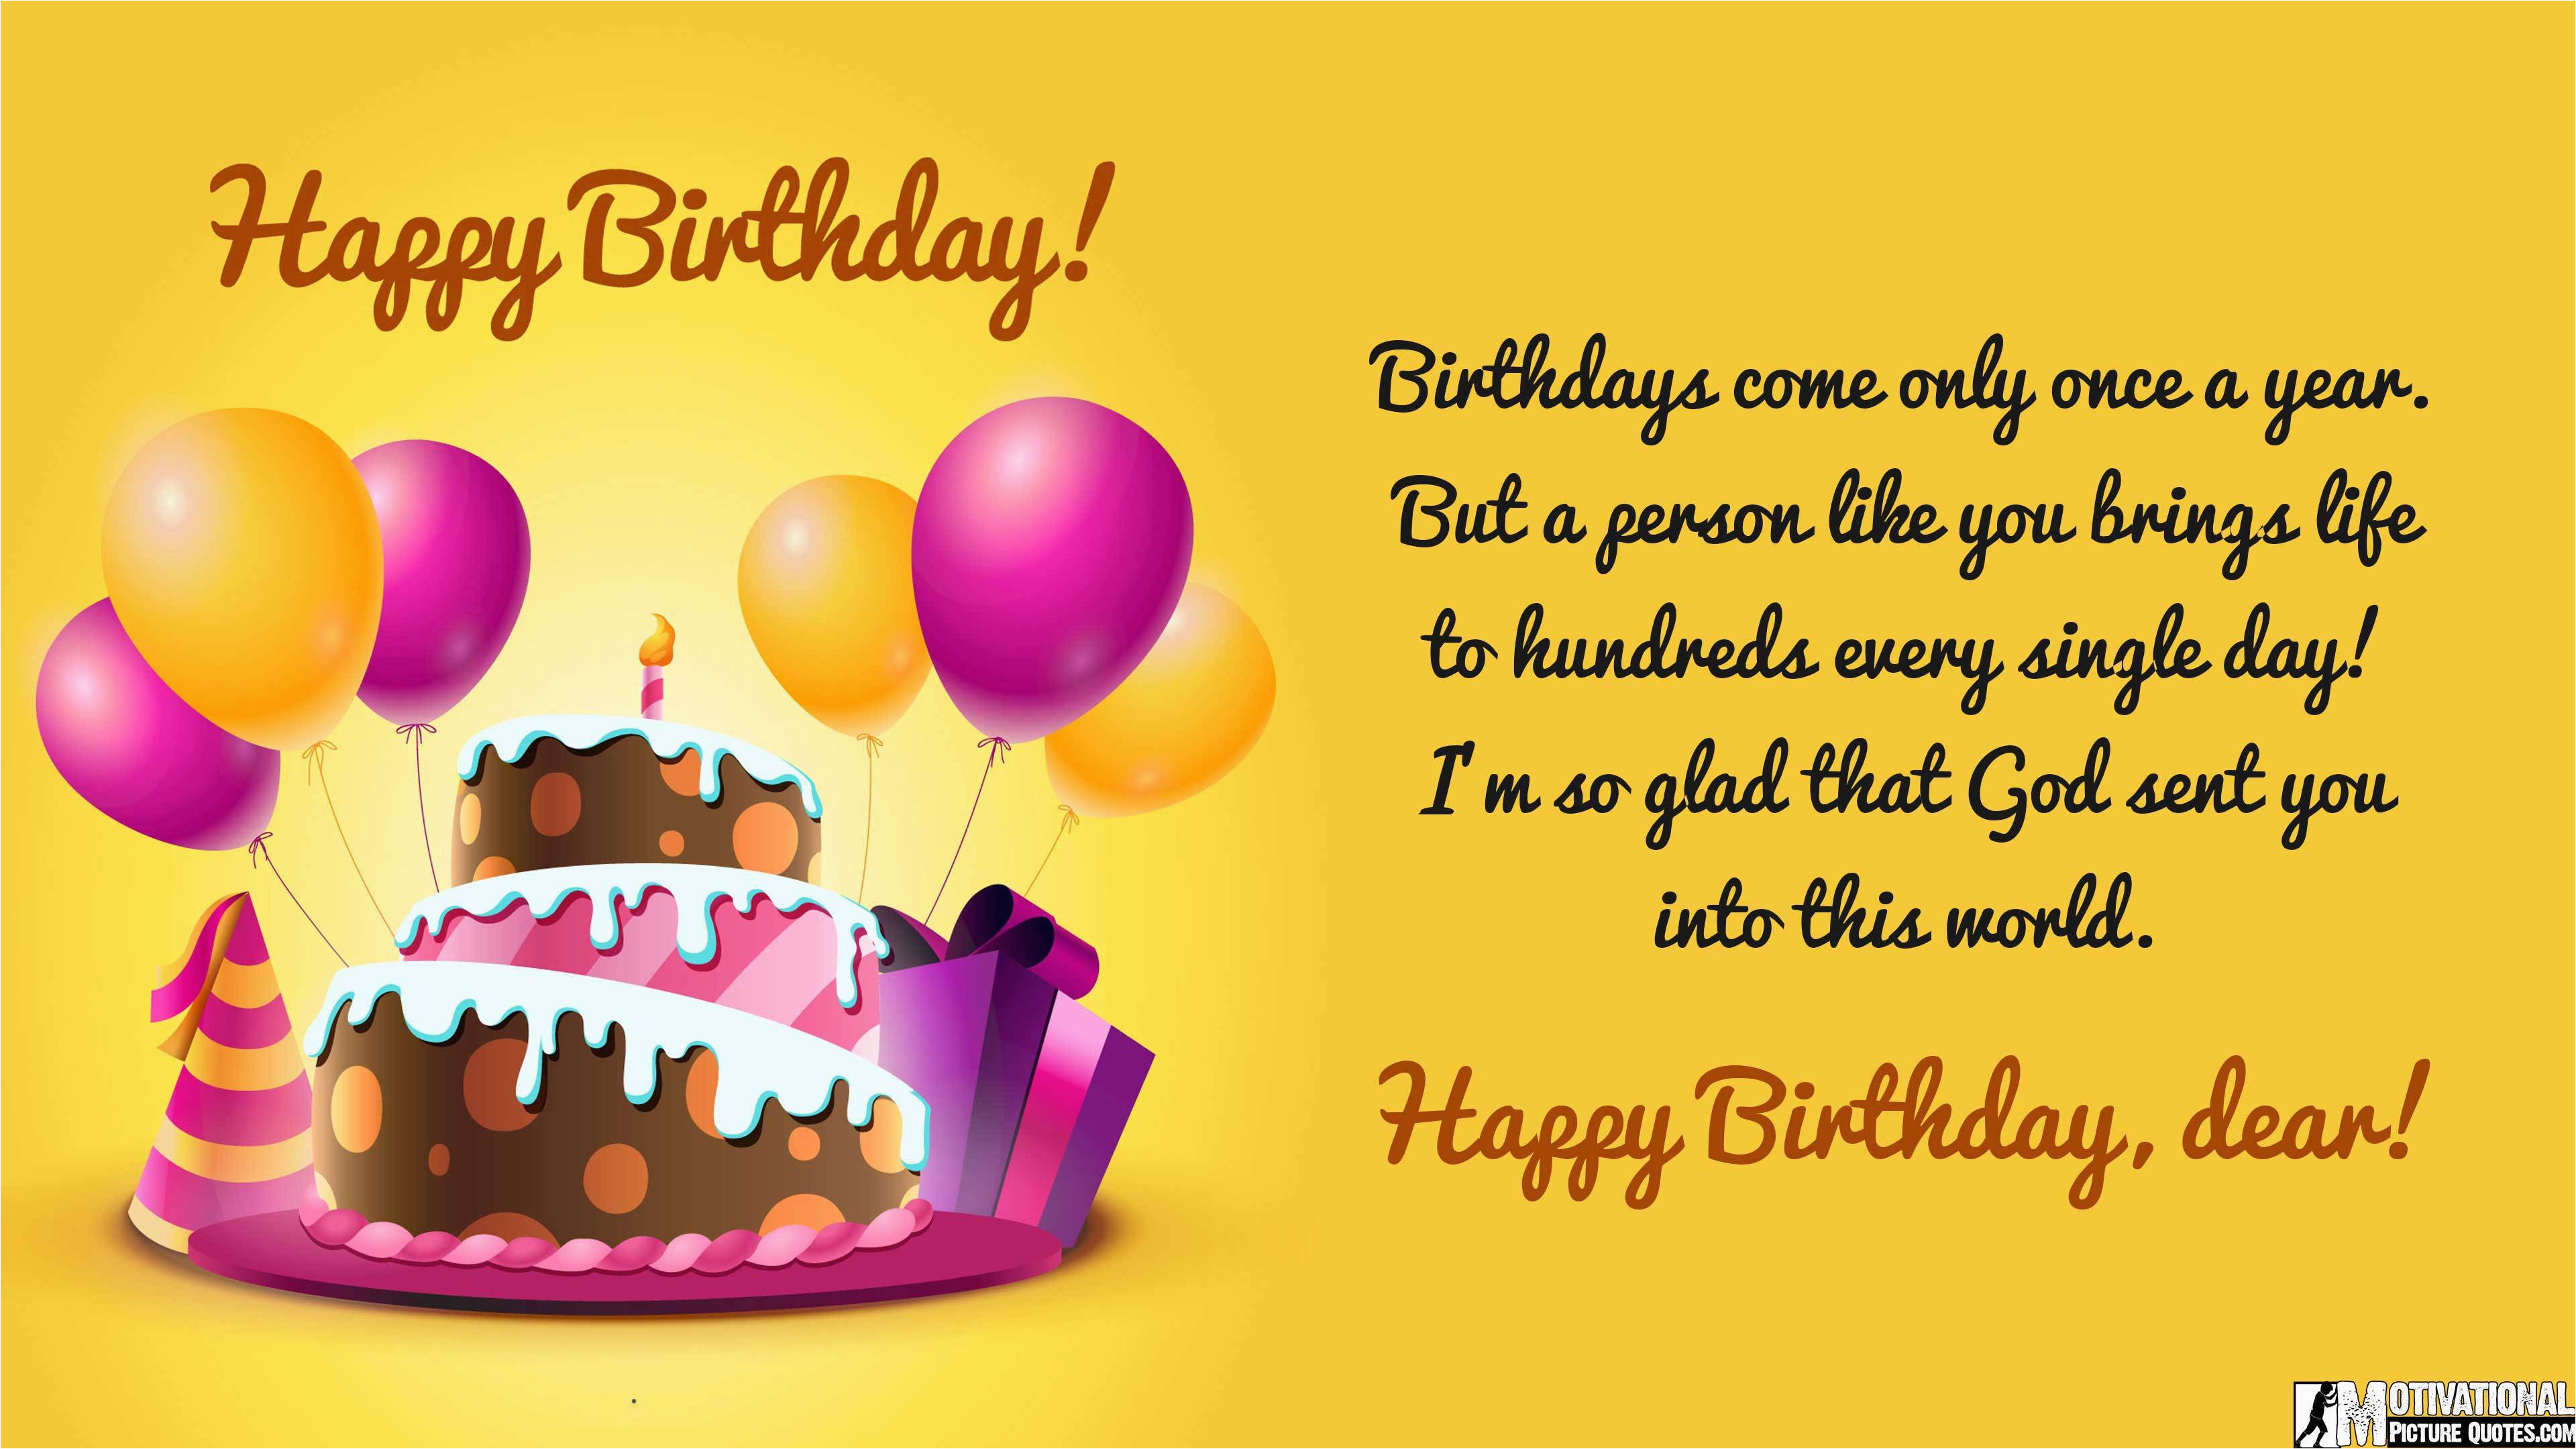 happy birthday images for him with quotes